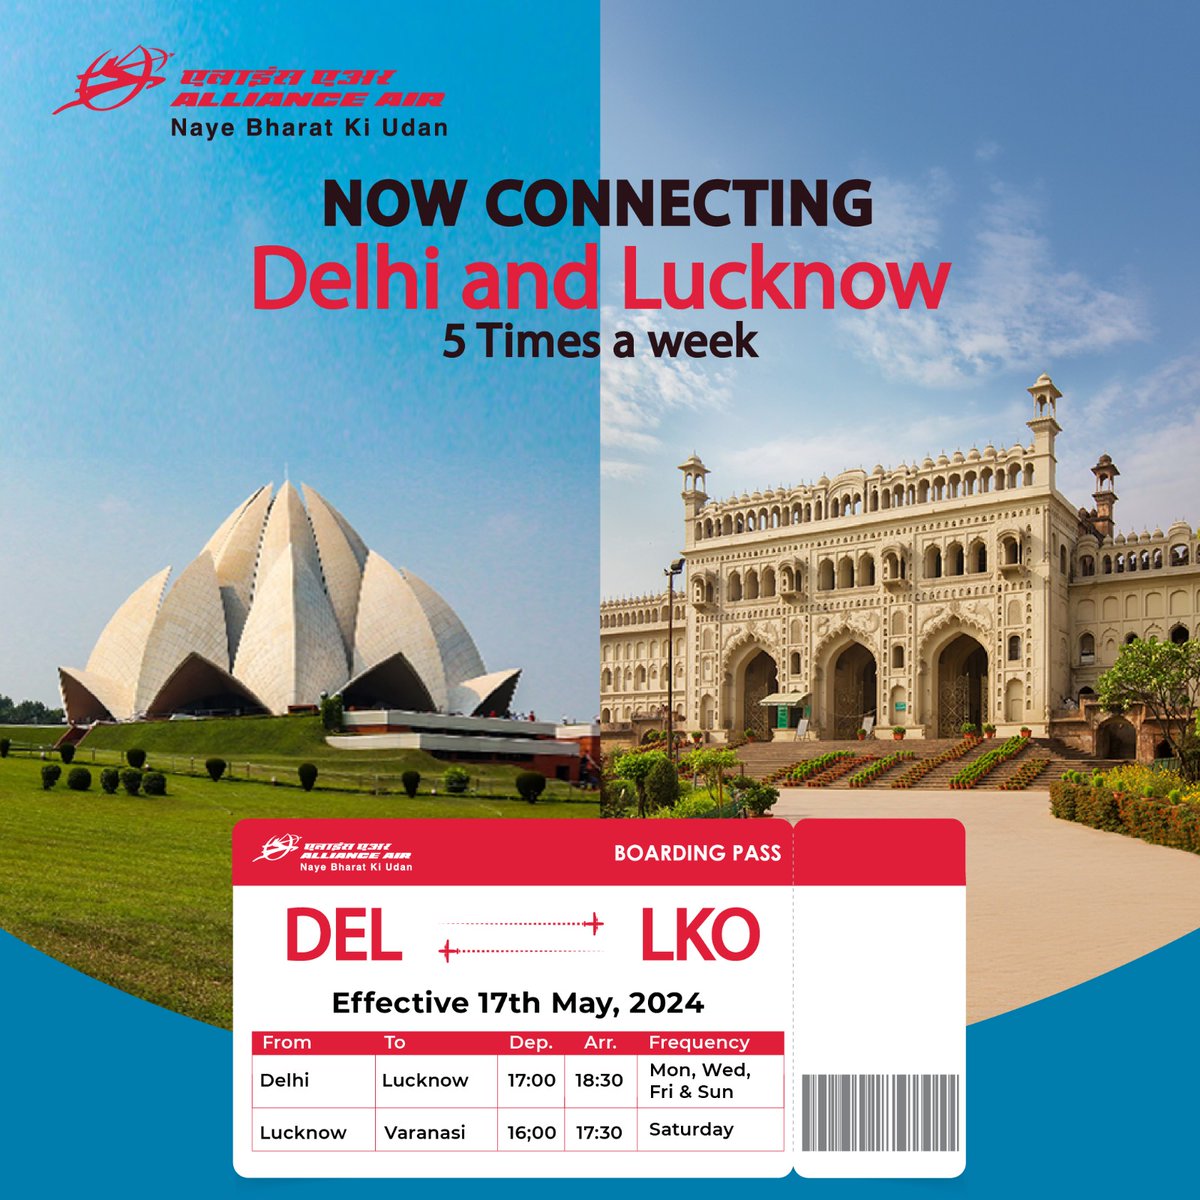 Travel with ease. Enjoy improved connectivity between Delhi and Lucknow. For bookings- allianceair.in/book or please contact +91-4442554255 or +91-4435113511 #AllianceAir #Explore #Travel #YourWindowToIndia #aviation #must #dekhoapnadesh #india #lucknow #delhi